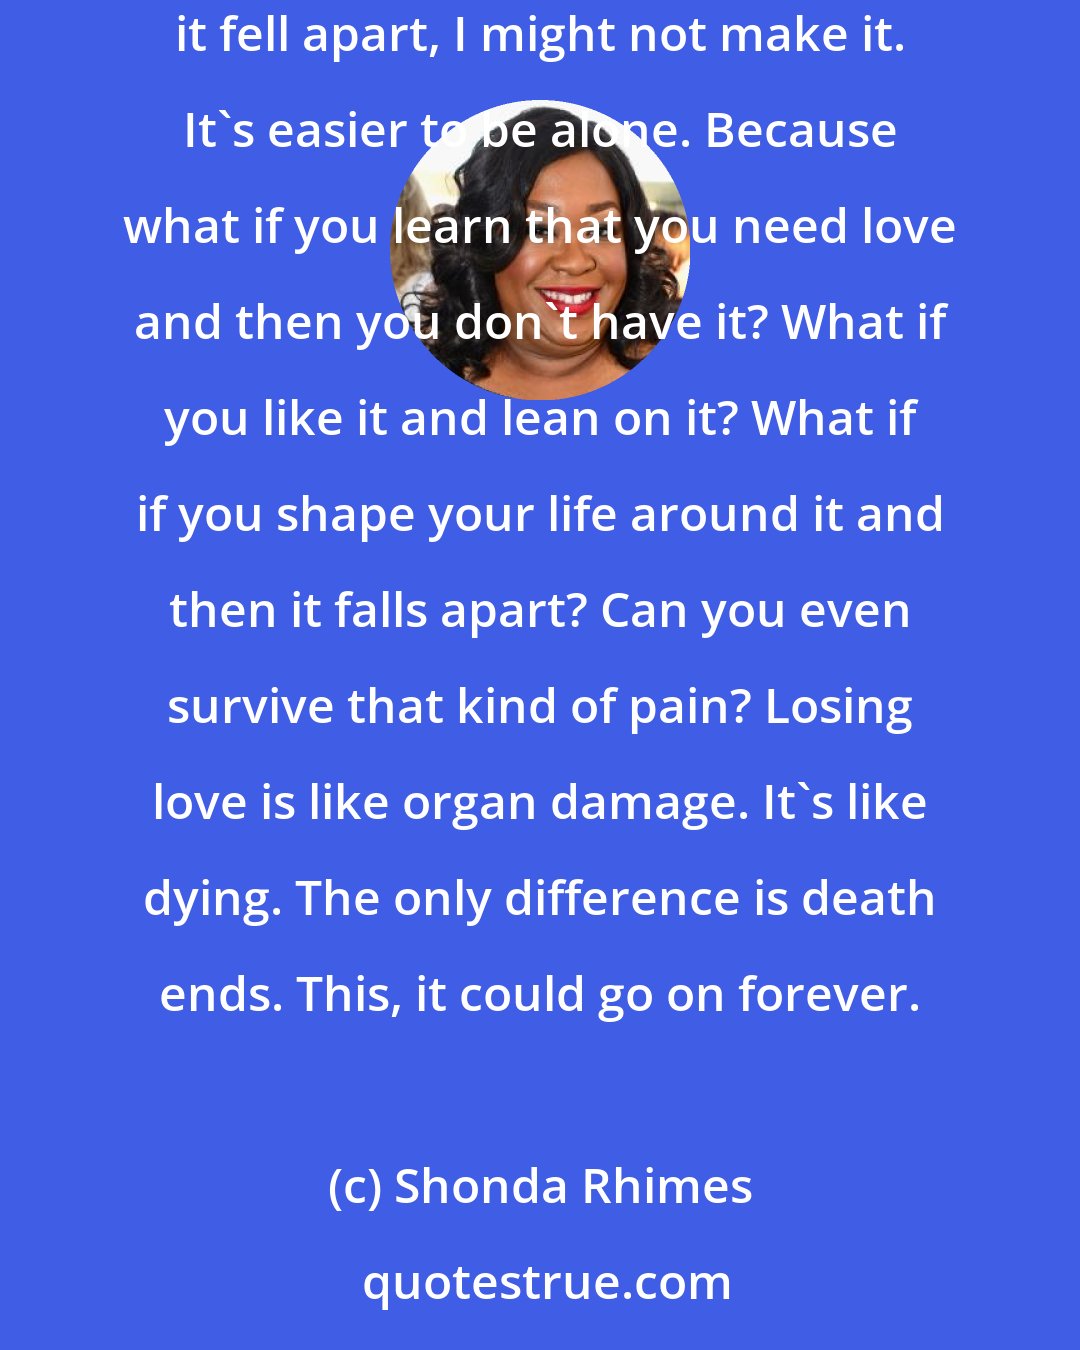 Shonda Rhimes: There's a reason I said I'd be happy alone. It wasn't 'cause I thought I'd be happy alone. It was because I thought if I loved someone and then it fell apart, I might not make it. It's easier to be alone. Because what if you learn that you need love and then you don't have it? What if you like it and lean on it? What if if you shape your life around it and then it falls apart? Can you even survive that kind of pain? Losing love is like organ damage. It's like dying. The only difference is death ends. This, it could go on forever.